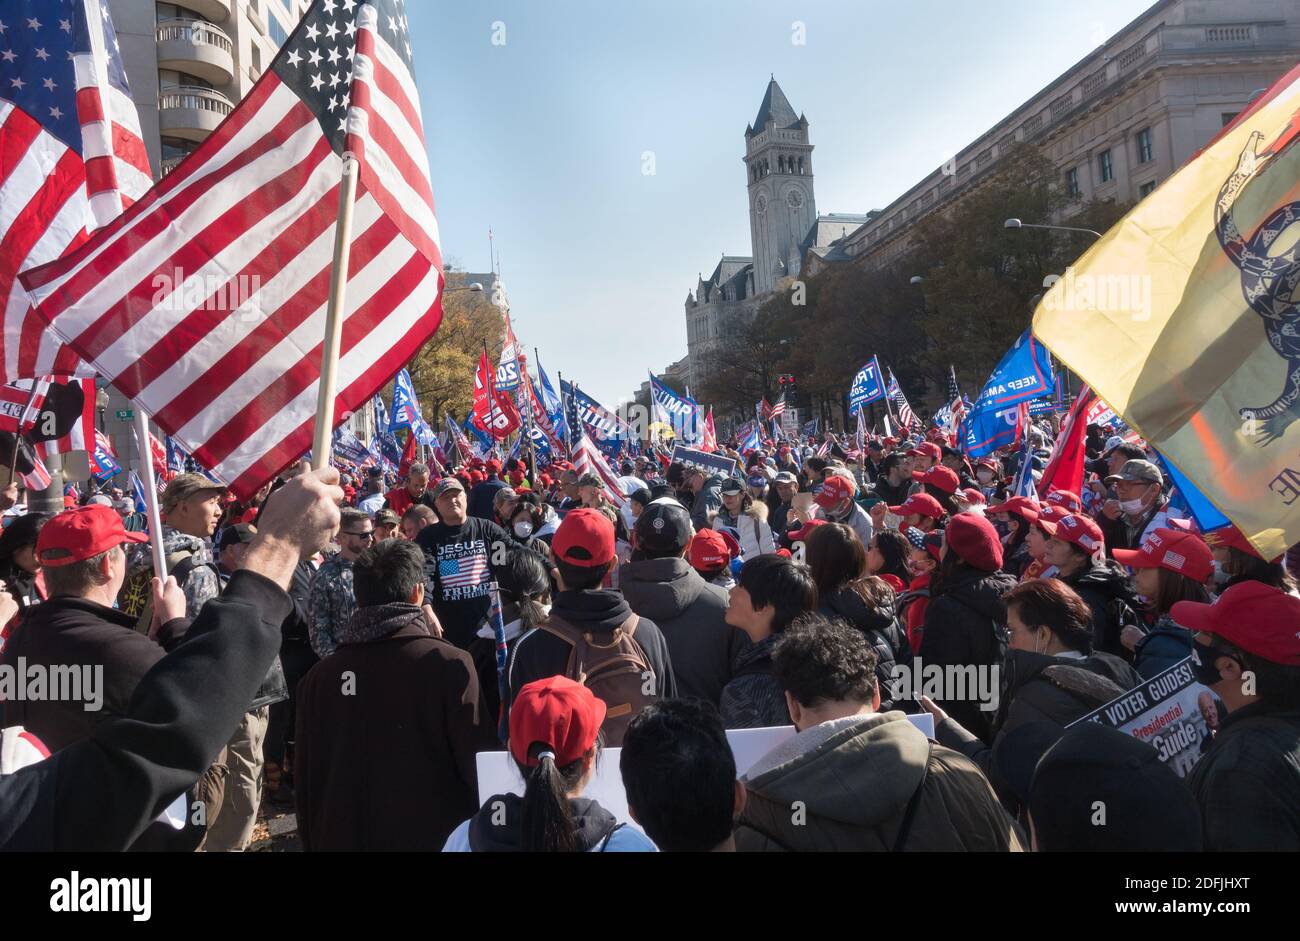 WASHINGTON, DC - NOV. 14, 2020: With Trump hotel in background, Trump supporters at Freedom Plaza rally in support of President Donald Trump, who refuses to concede the election. Event was organized by 'Women for America First,' 'Stop the Steal' and the 'Million MAGA March.' Stock Photo